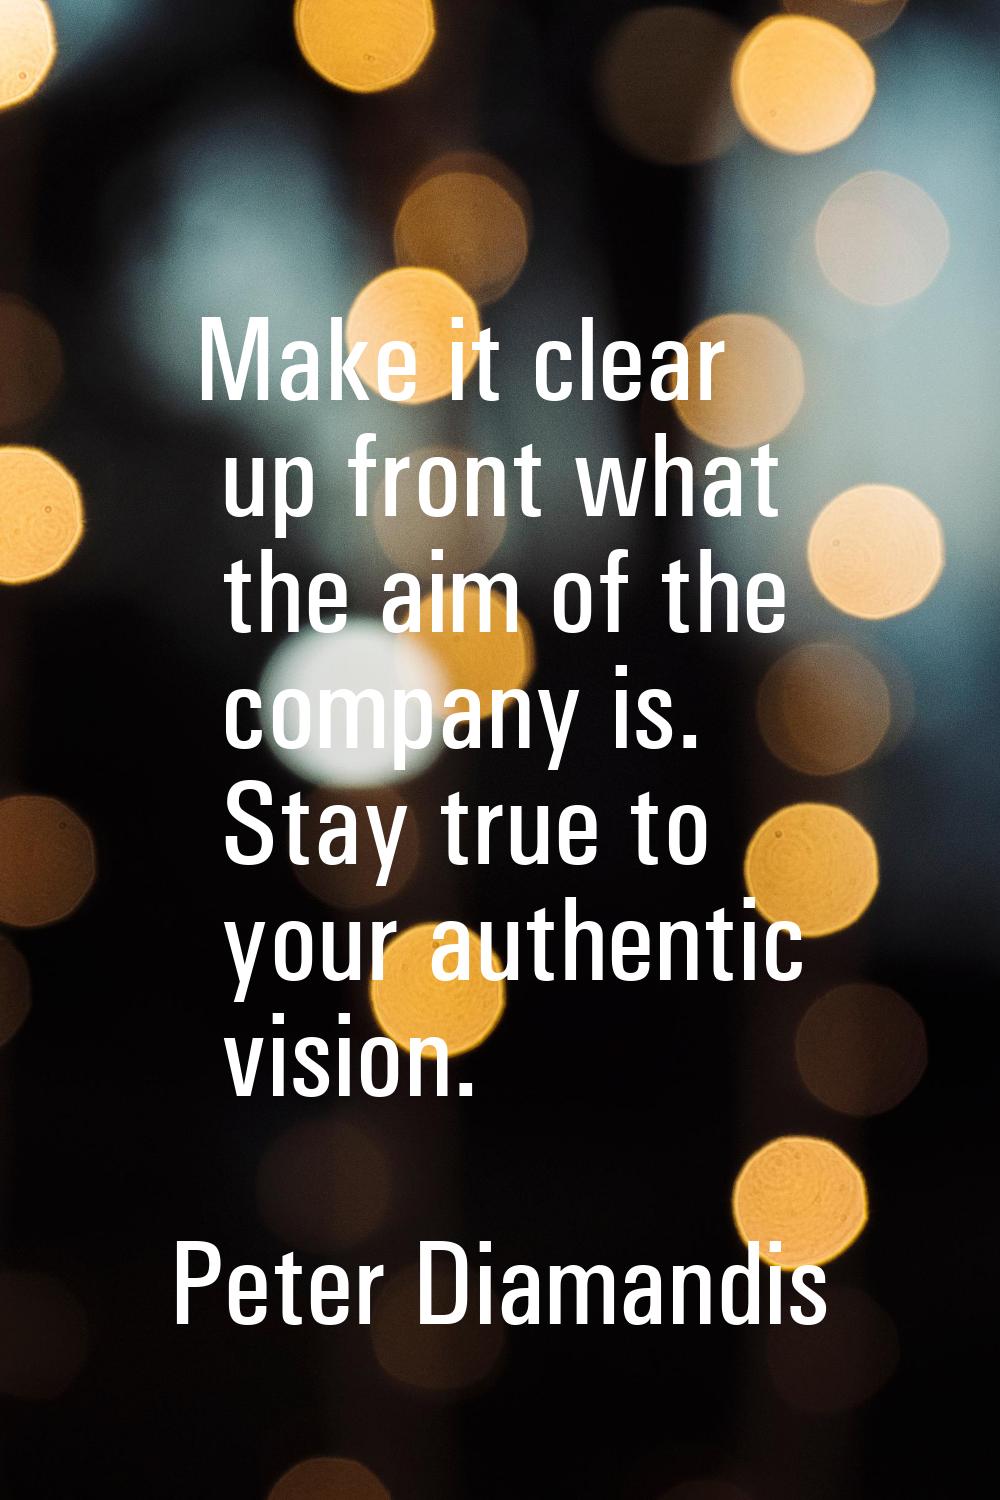 Make it clear up front what the aim of the company is. Stay true to your authentic vision.